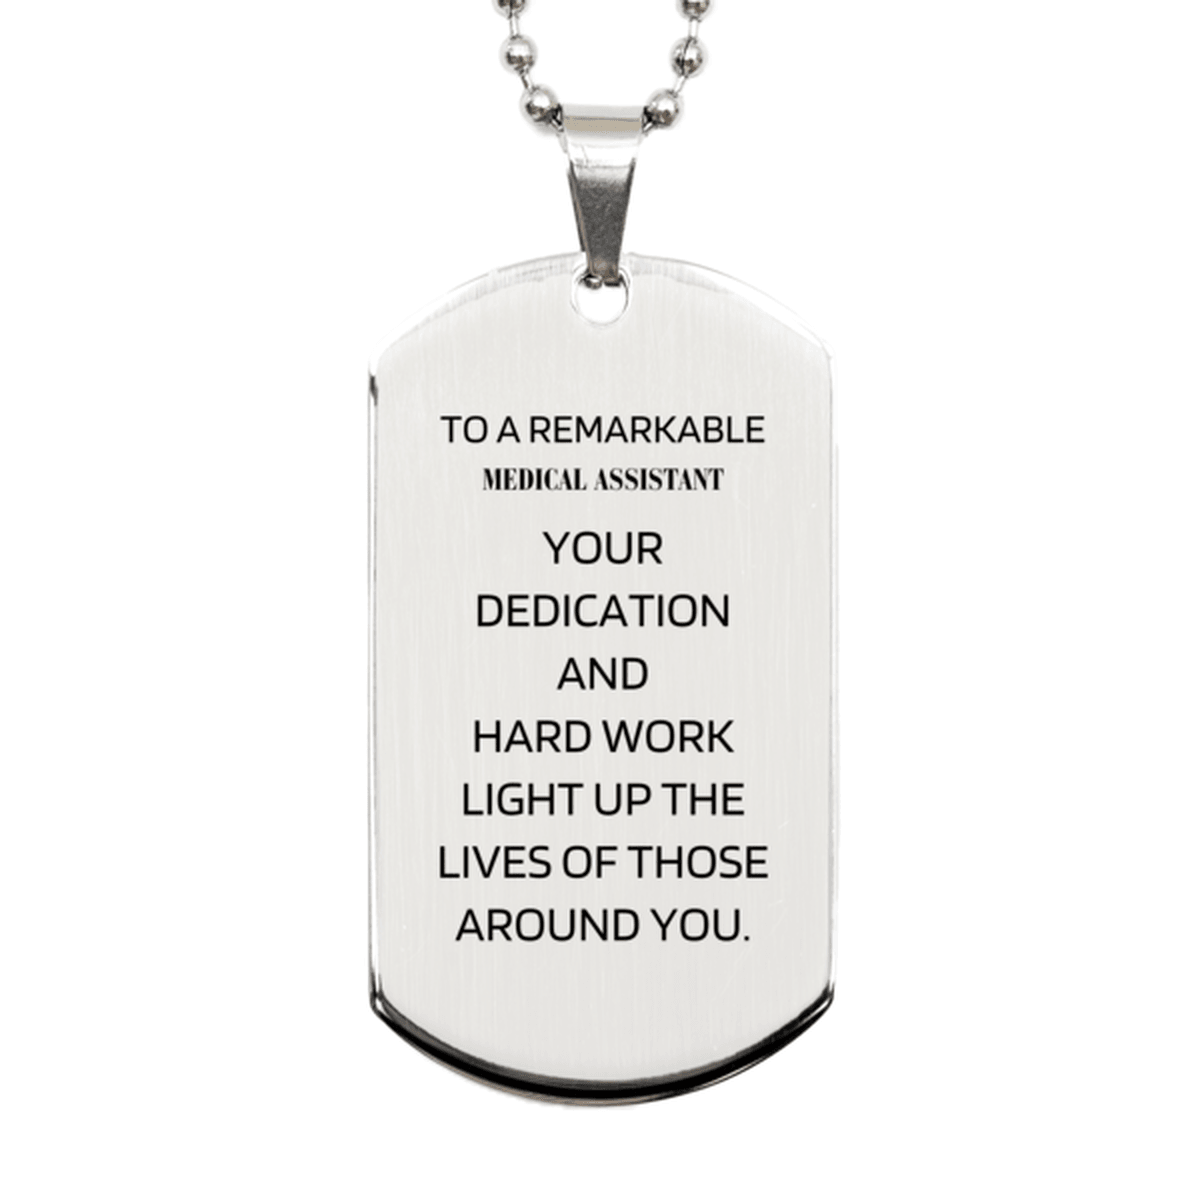 Remarkable Medical Assistant Gifts, Your dedication and hard work, Inspirational Birthday Christmas Unique Silver Dog Tag For Medical Assistant, Coworkers, Men, Women, Friends - Mallard Moon Gift Shop